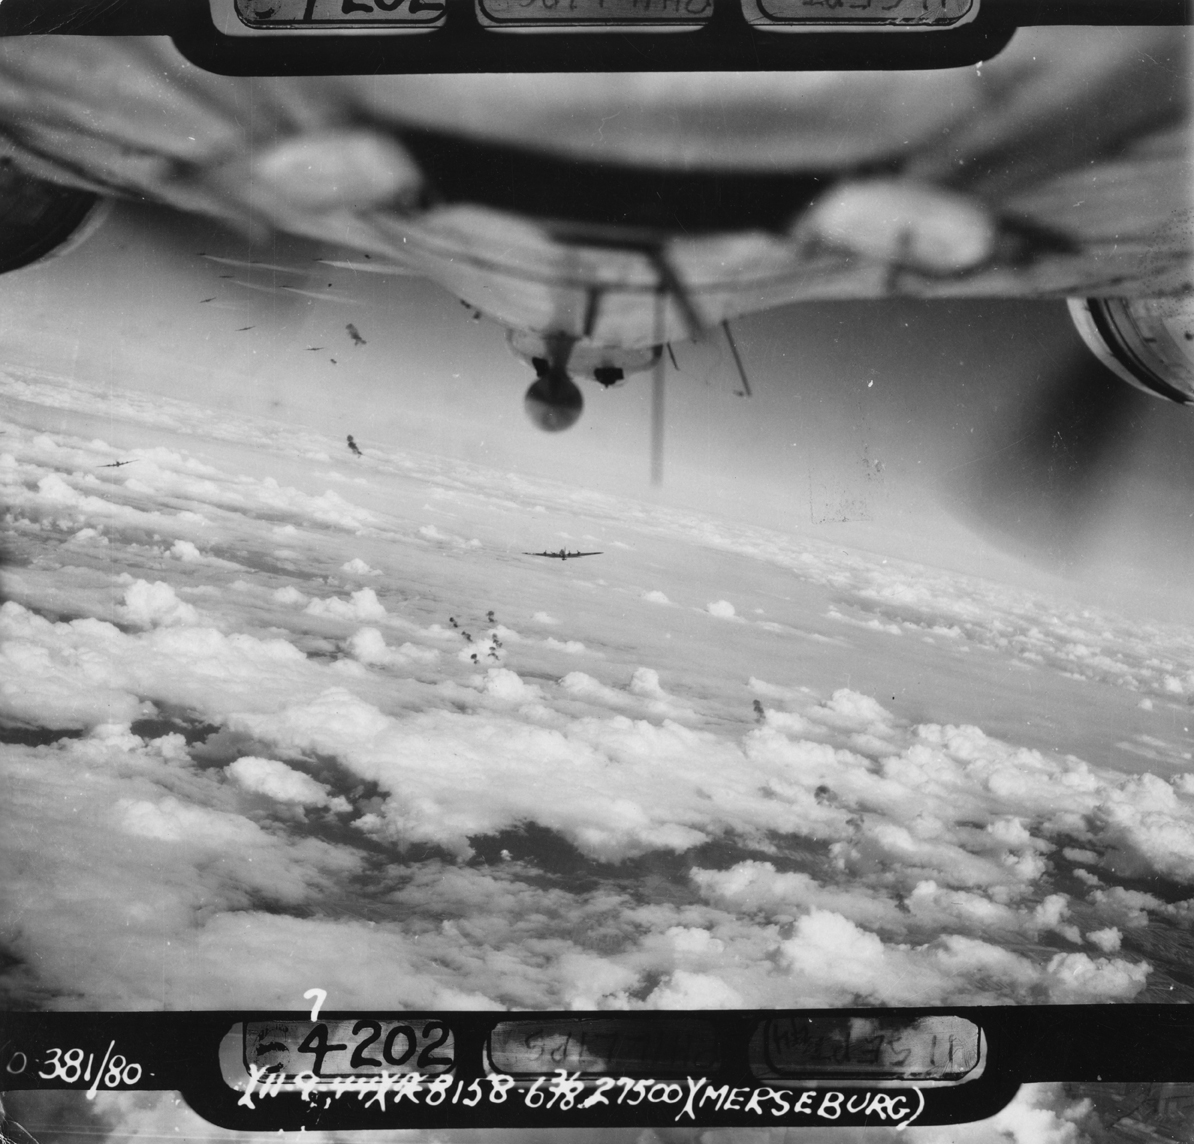 B-17 Flying Fortresses of the 381st Bomb Group fly through flak during a mission over Merseburg. Photographed from a B-17. Even if this is not related to Walter E. Poulsen, his view from the ball turret must have been similar. (© IWM, FRE 4857)